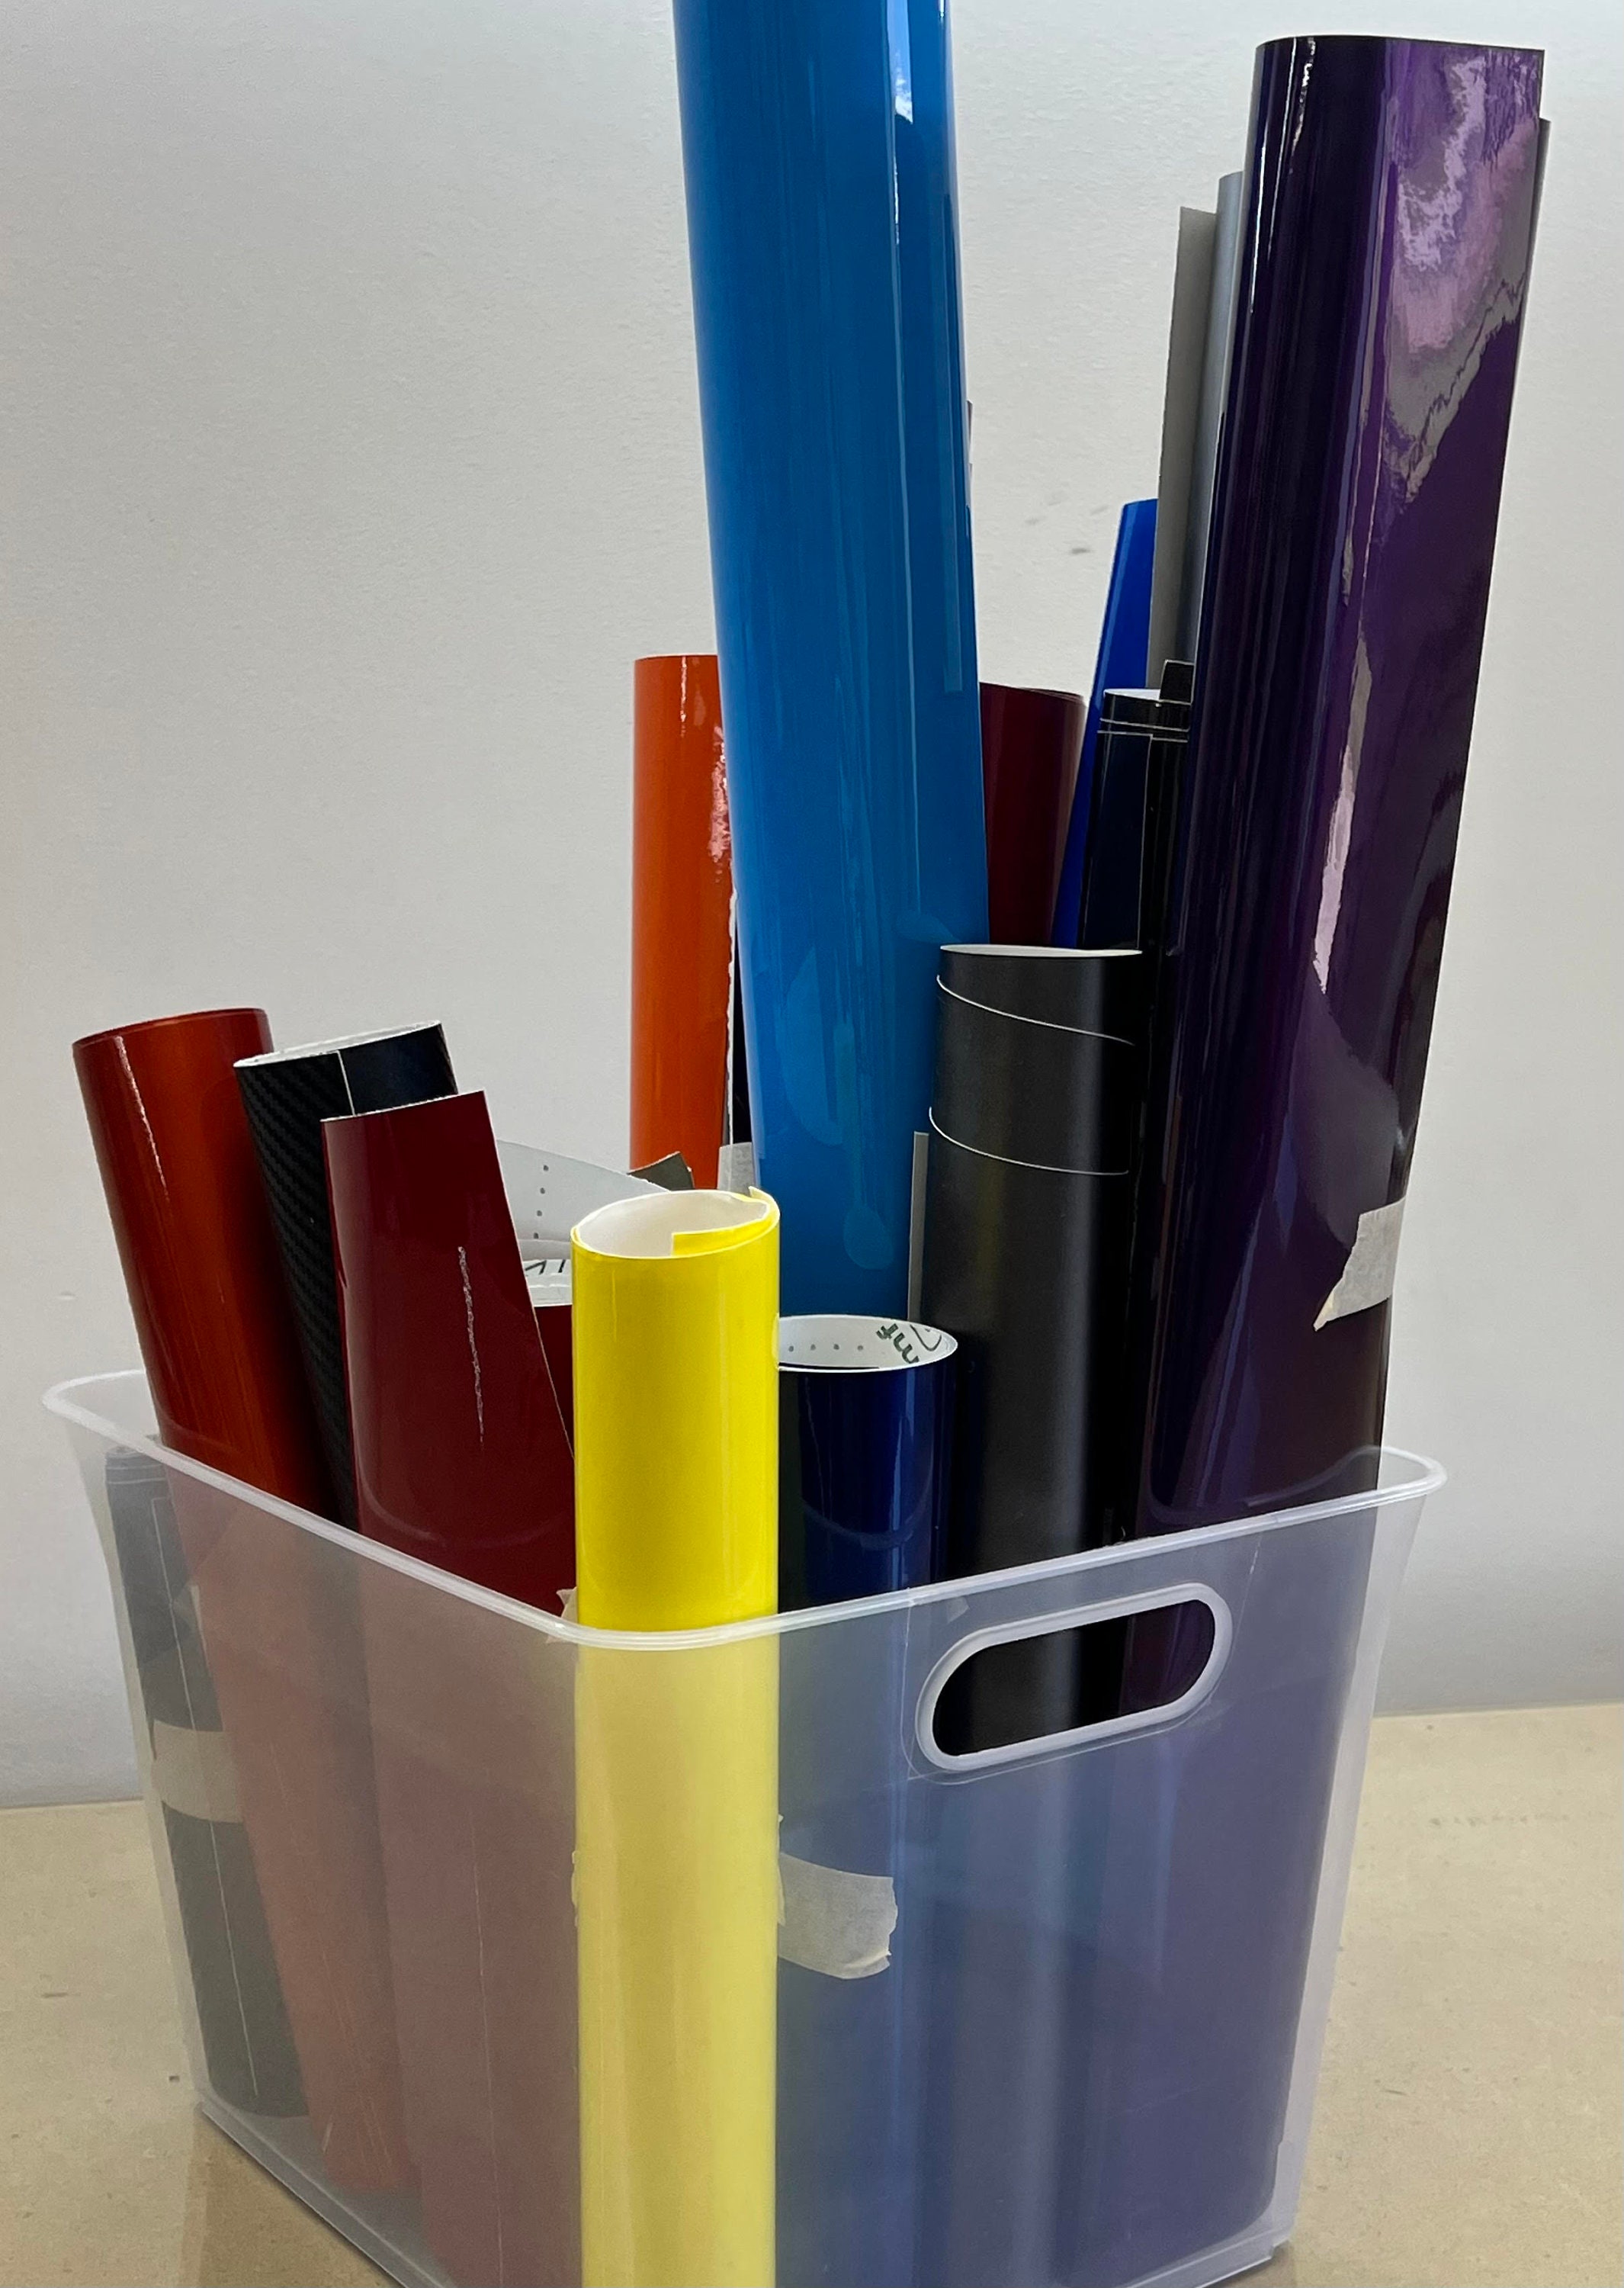 Wholesale Suctioned Vinyl Weeding Scrap Collector and Holder for Weeding  Tools for Vinyl, HTV Crafting Adhesive Paper Sheets Holder Manufacturer and  Supplier